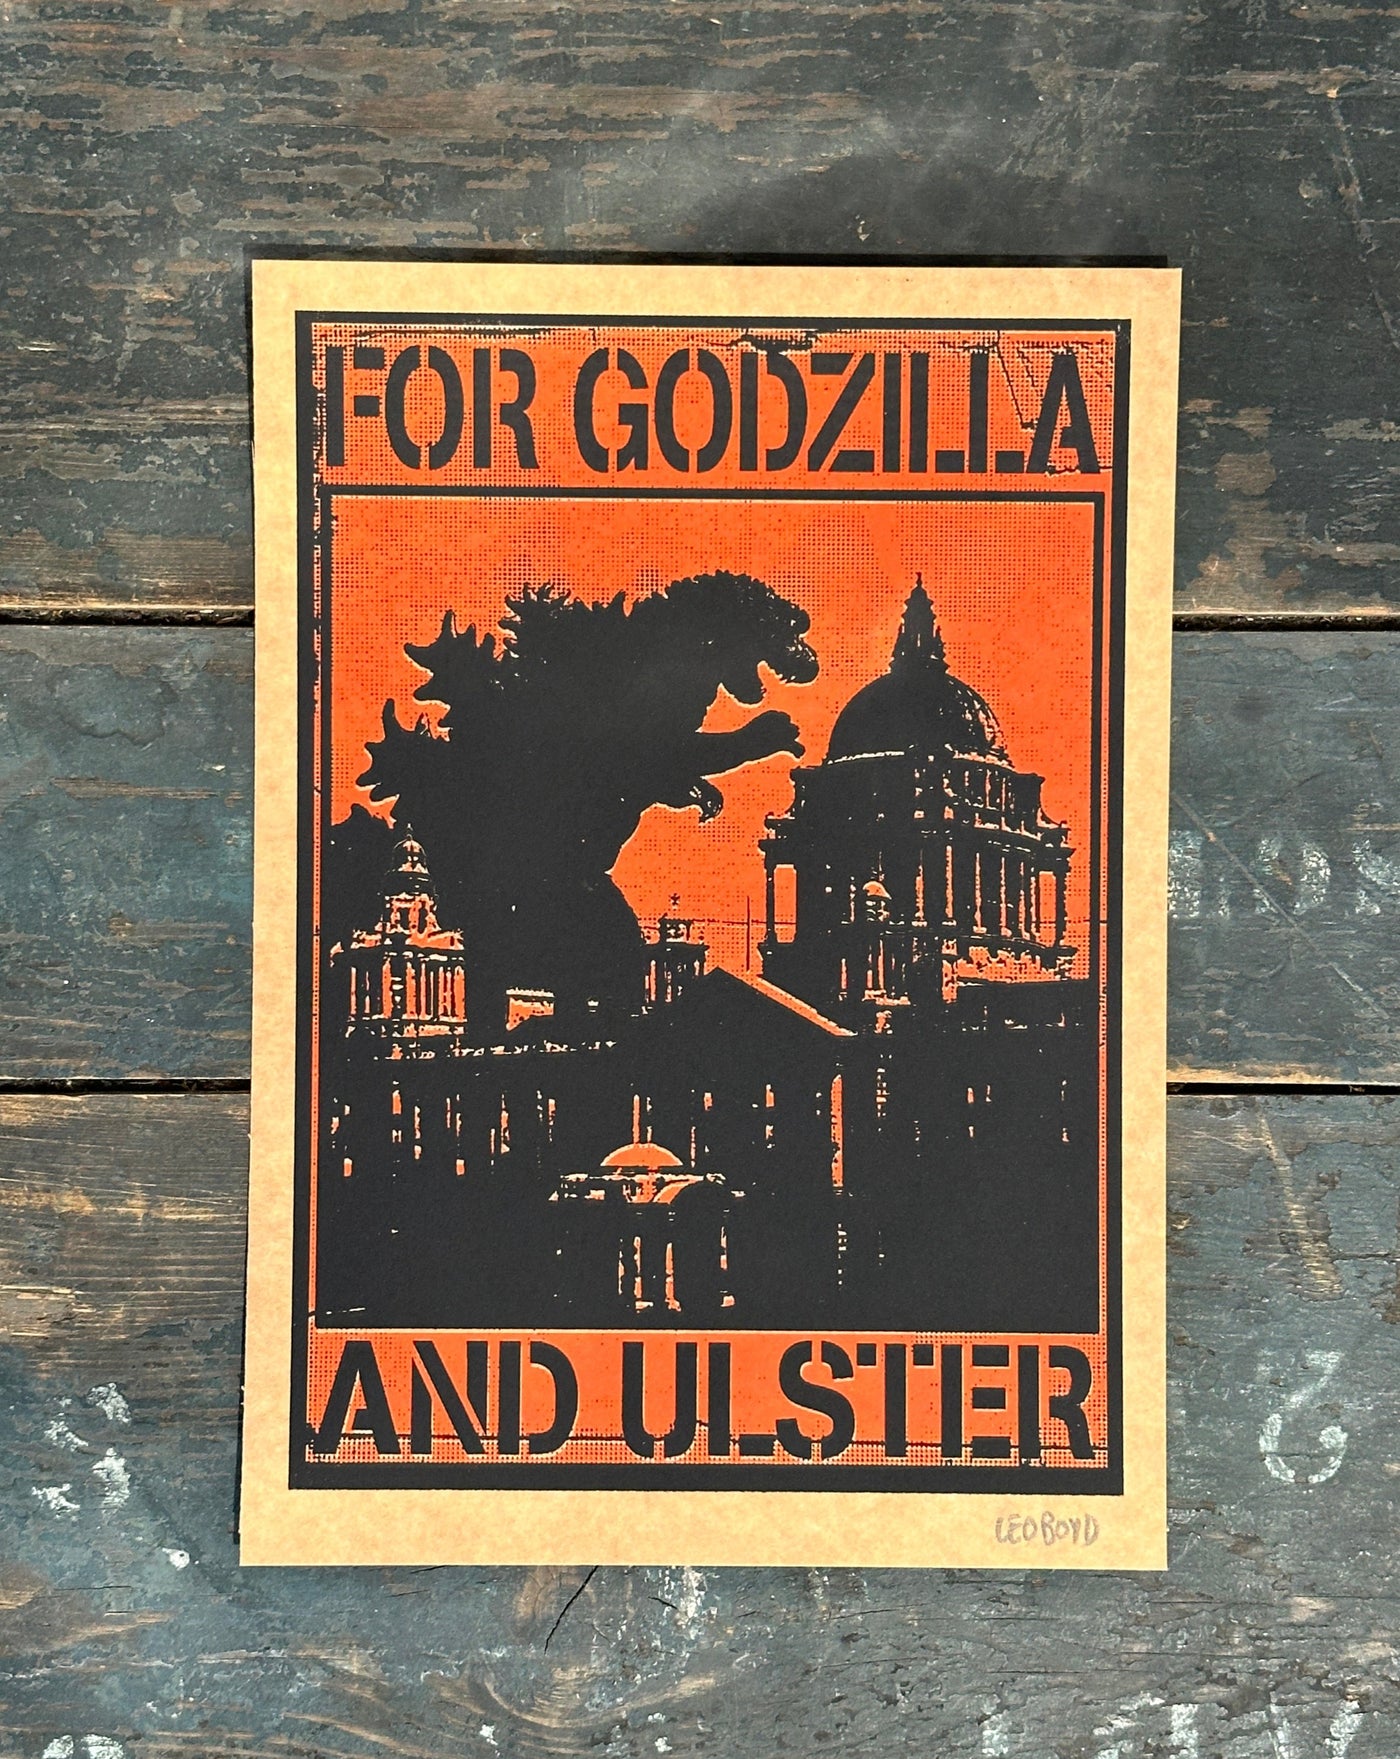 Red For Godzilla And Ulster Print | Leo Boyd